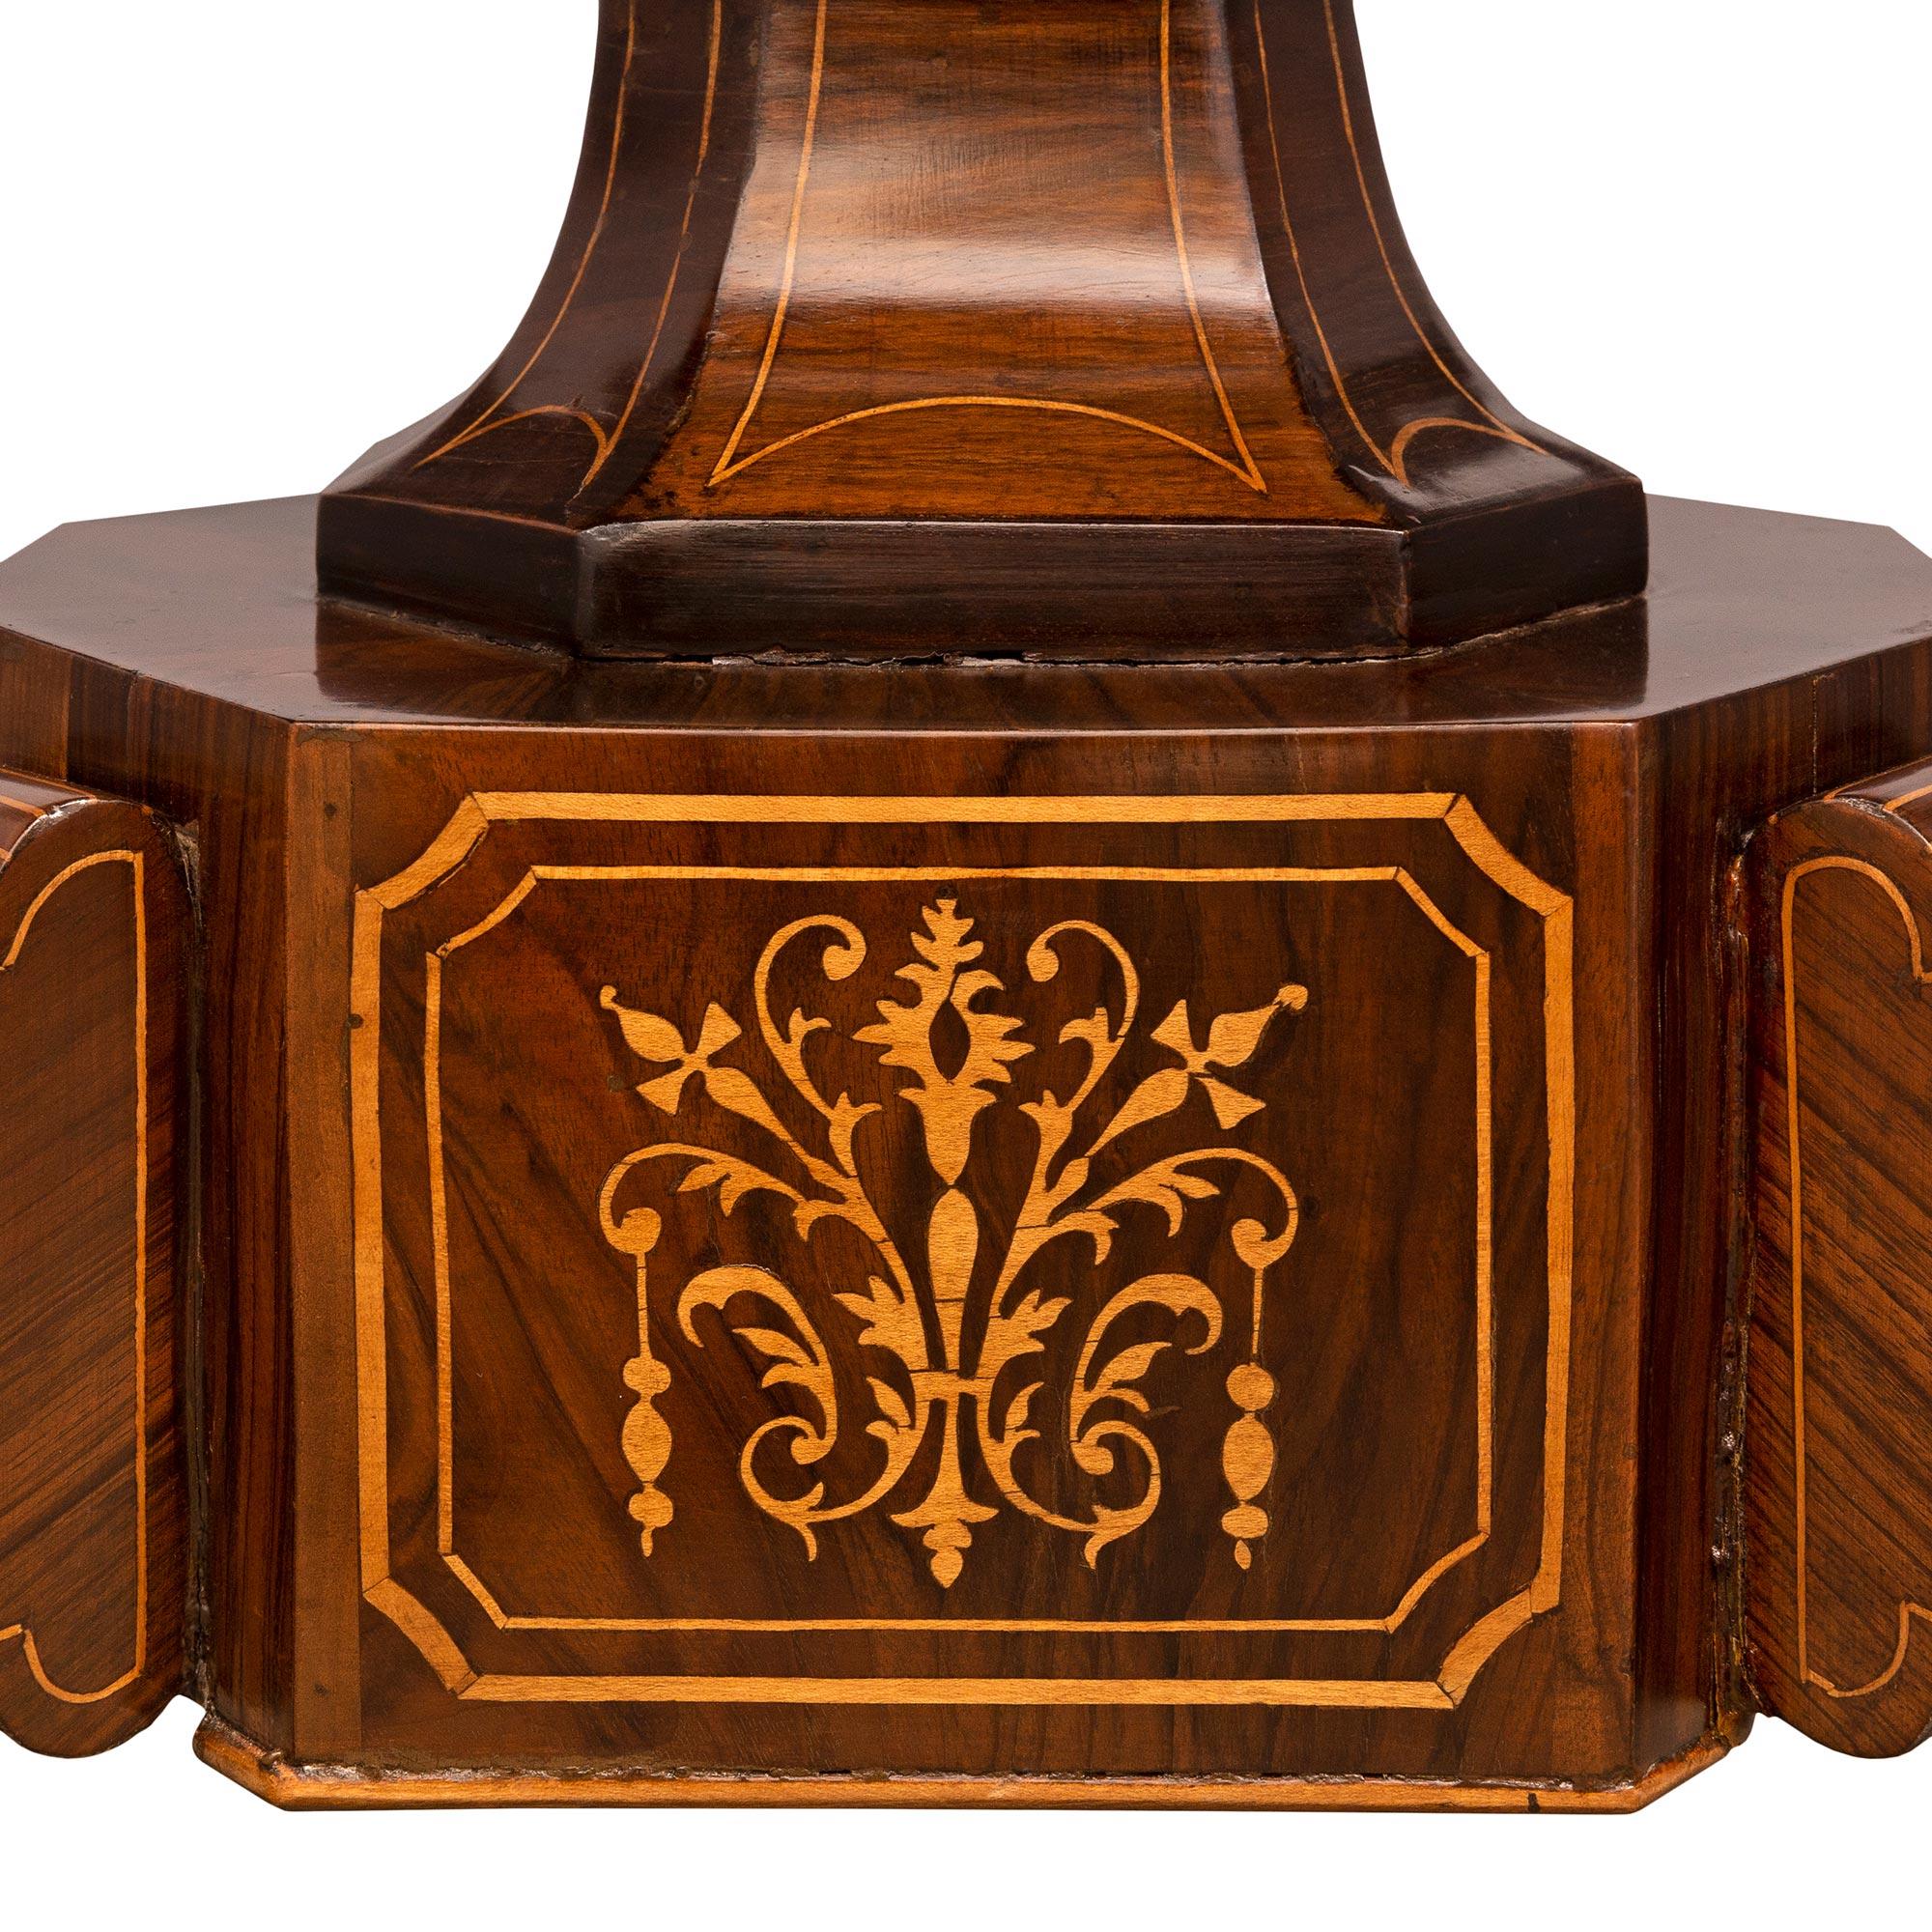 Italian 19th Century Charles X Period Walnut and Maplewood Inlaid Table For Sale 7